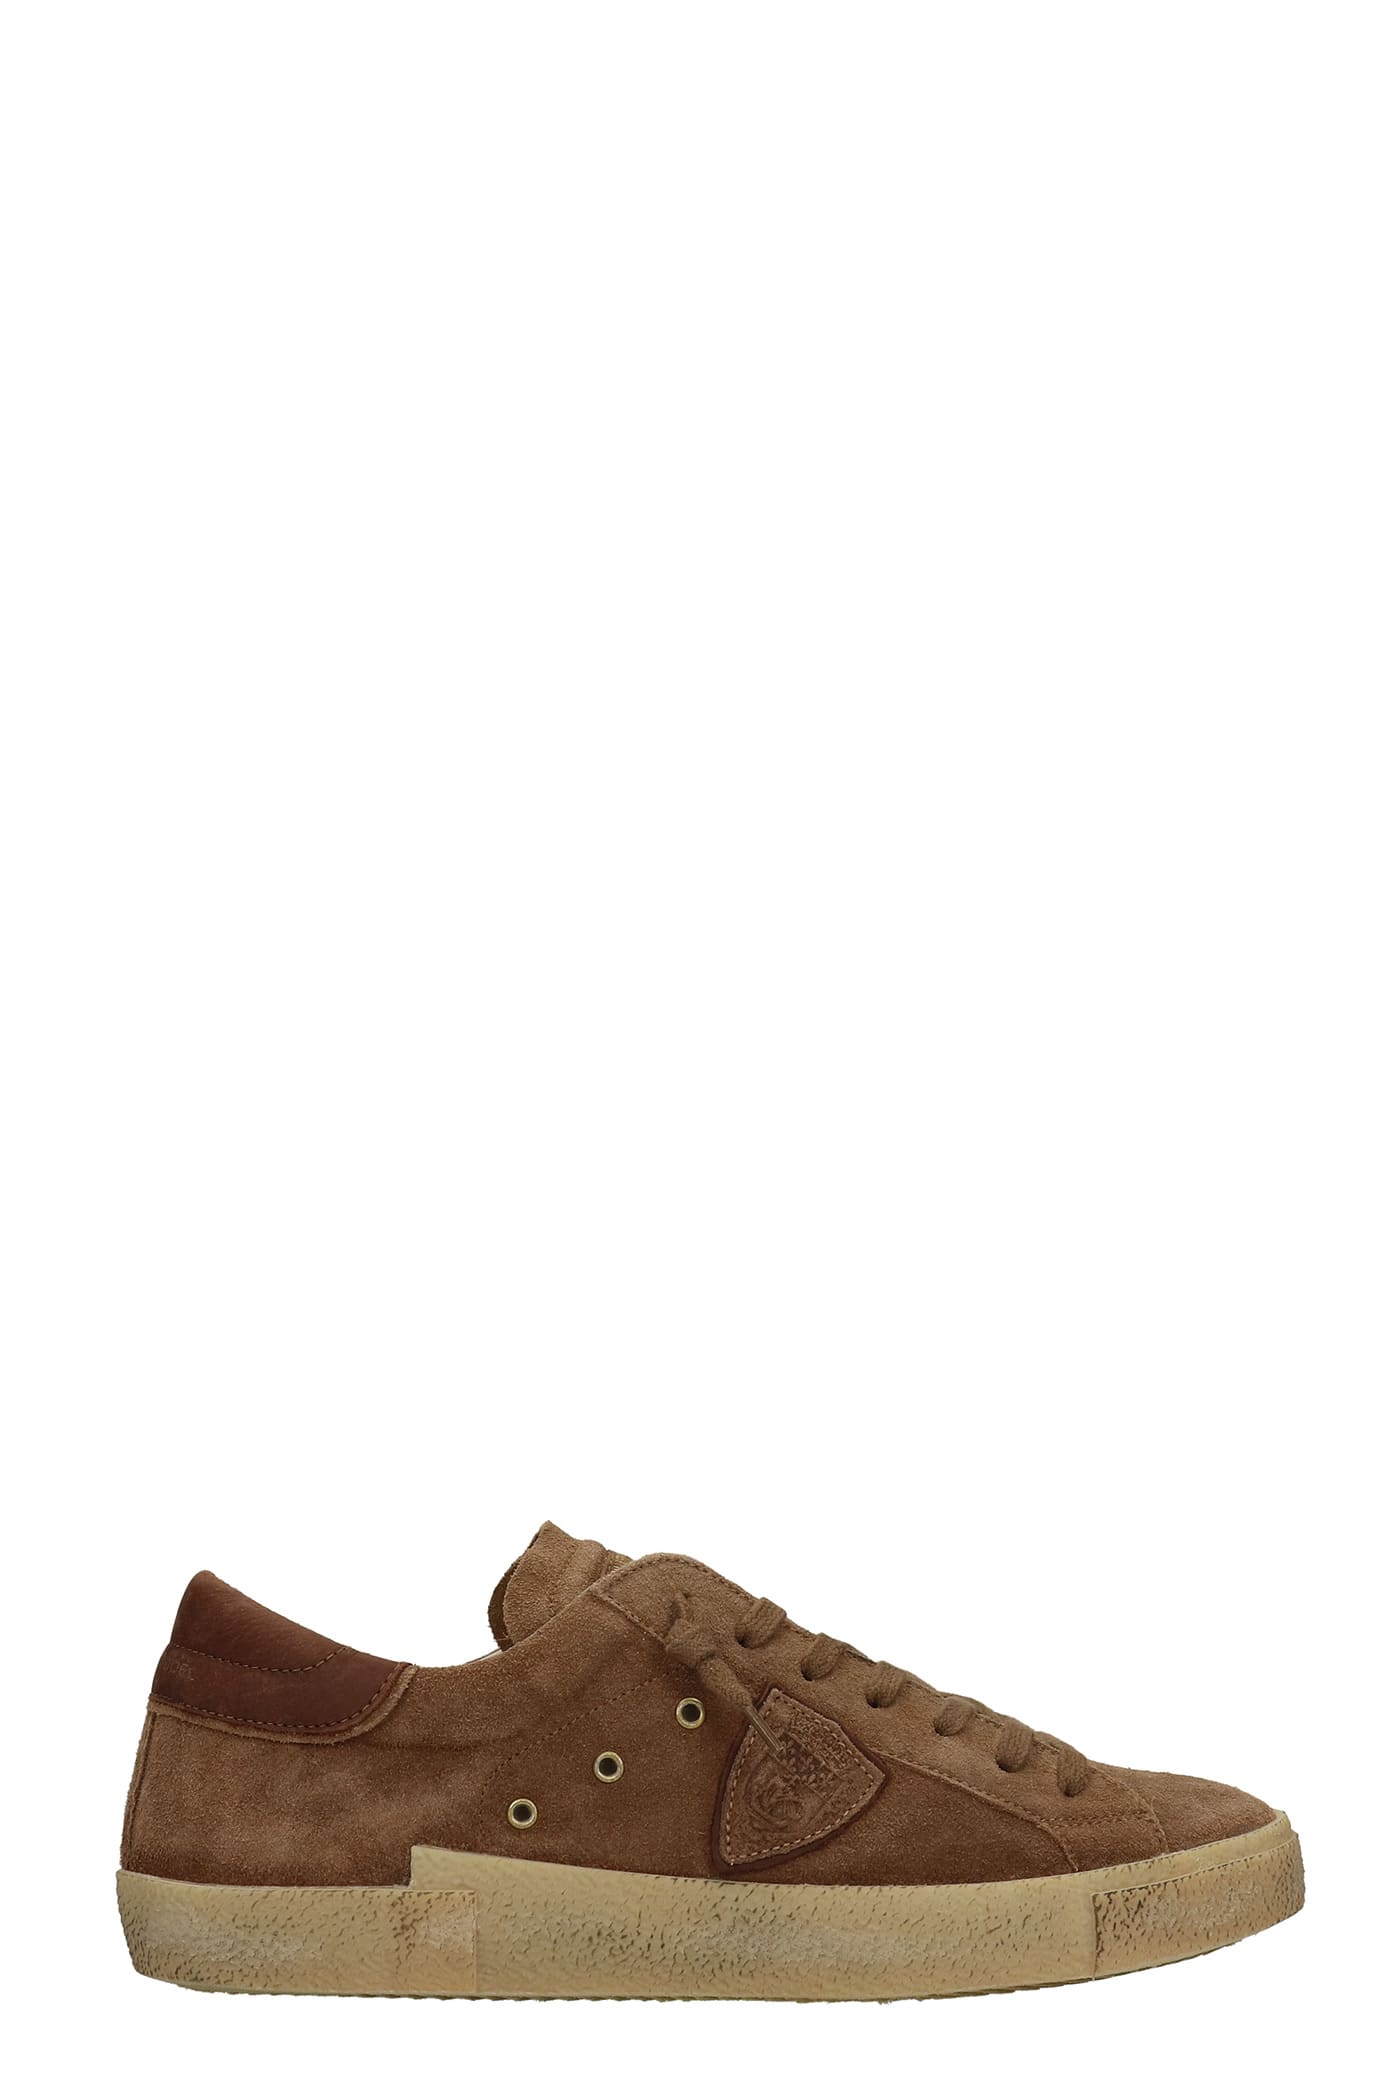 Philippe Model Prsx Sneakers In Leather Color Suede